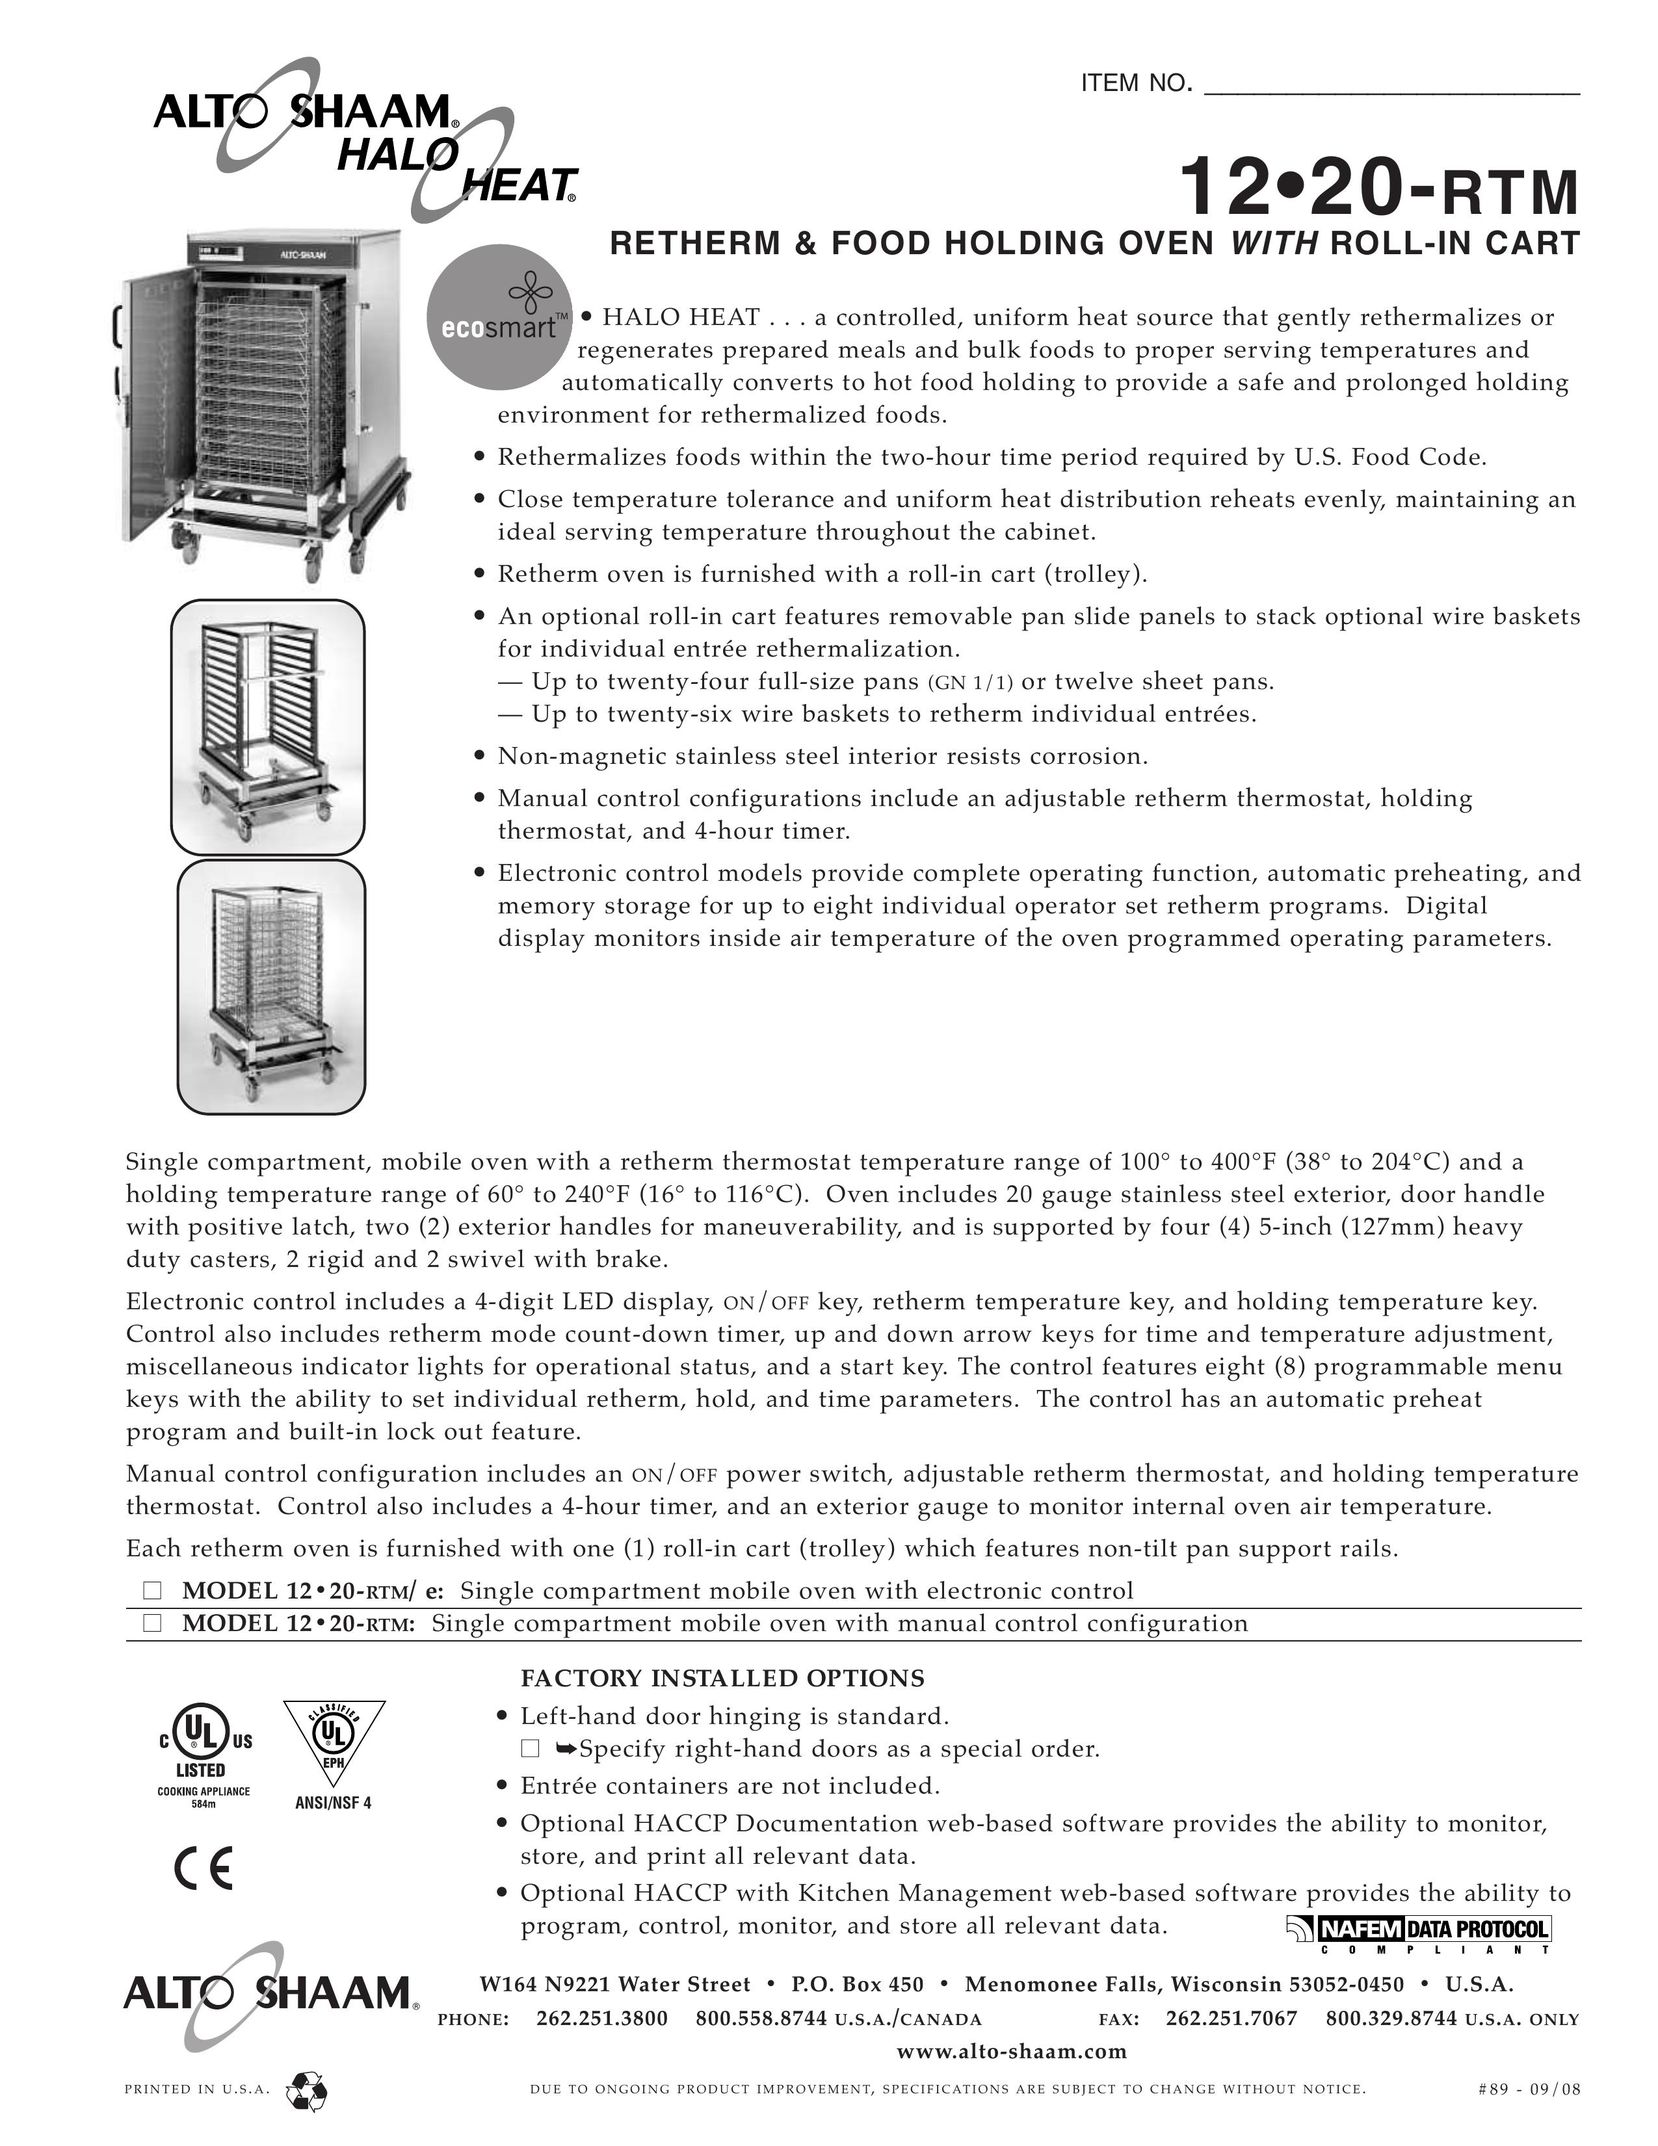 Alto-Shaam 12-20 RTM Oven User Manual